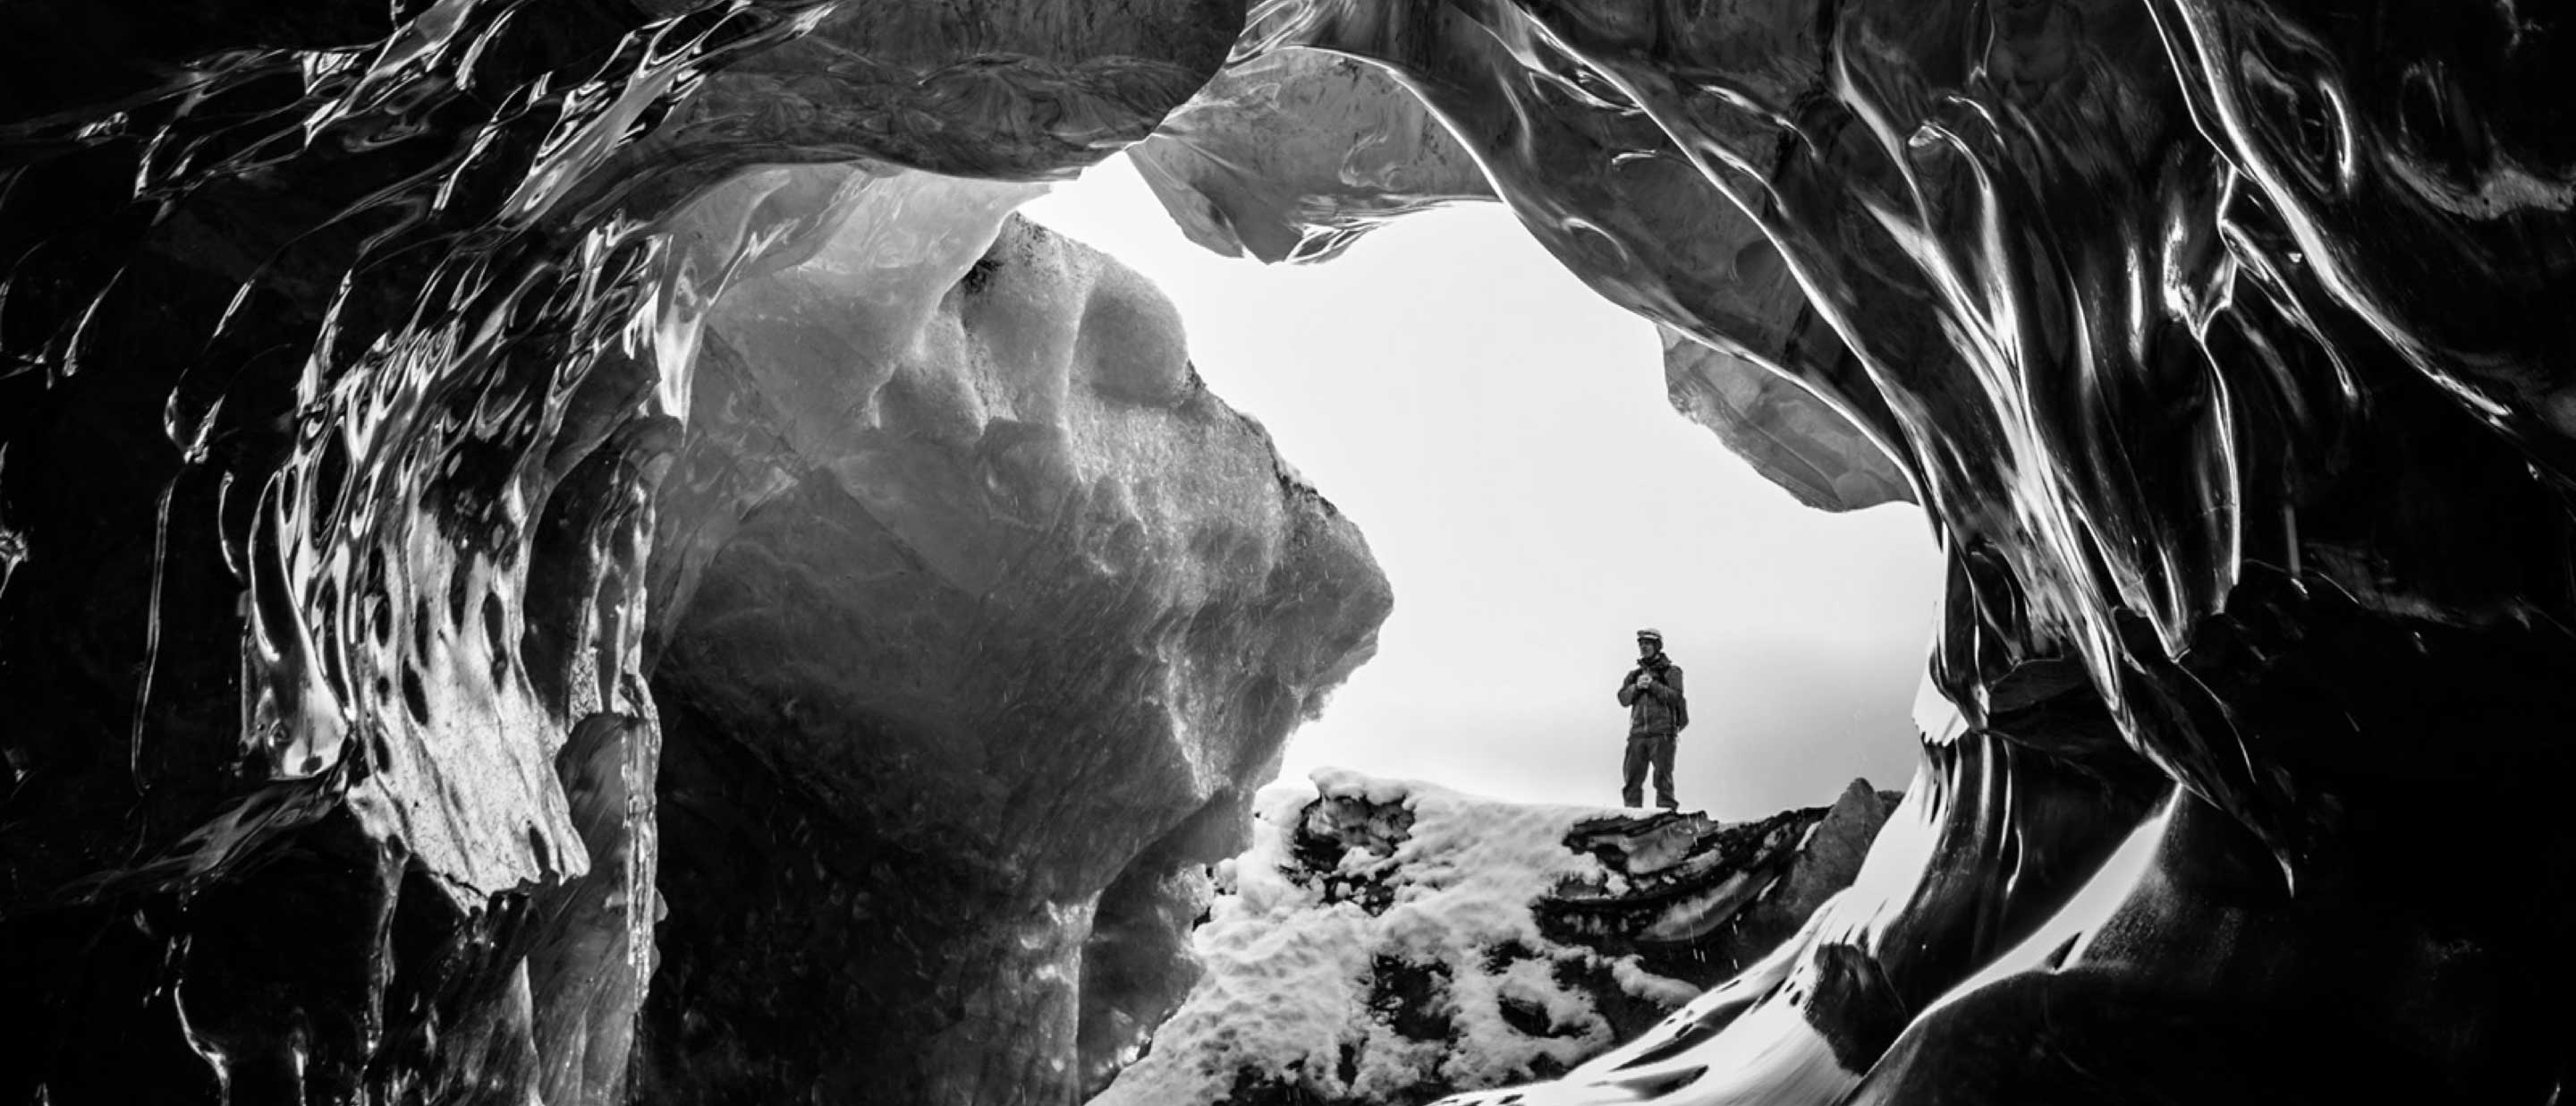 man in ice cave